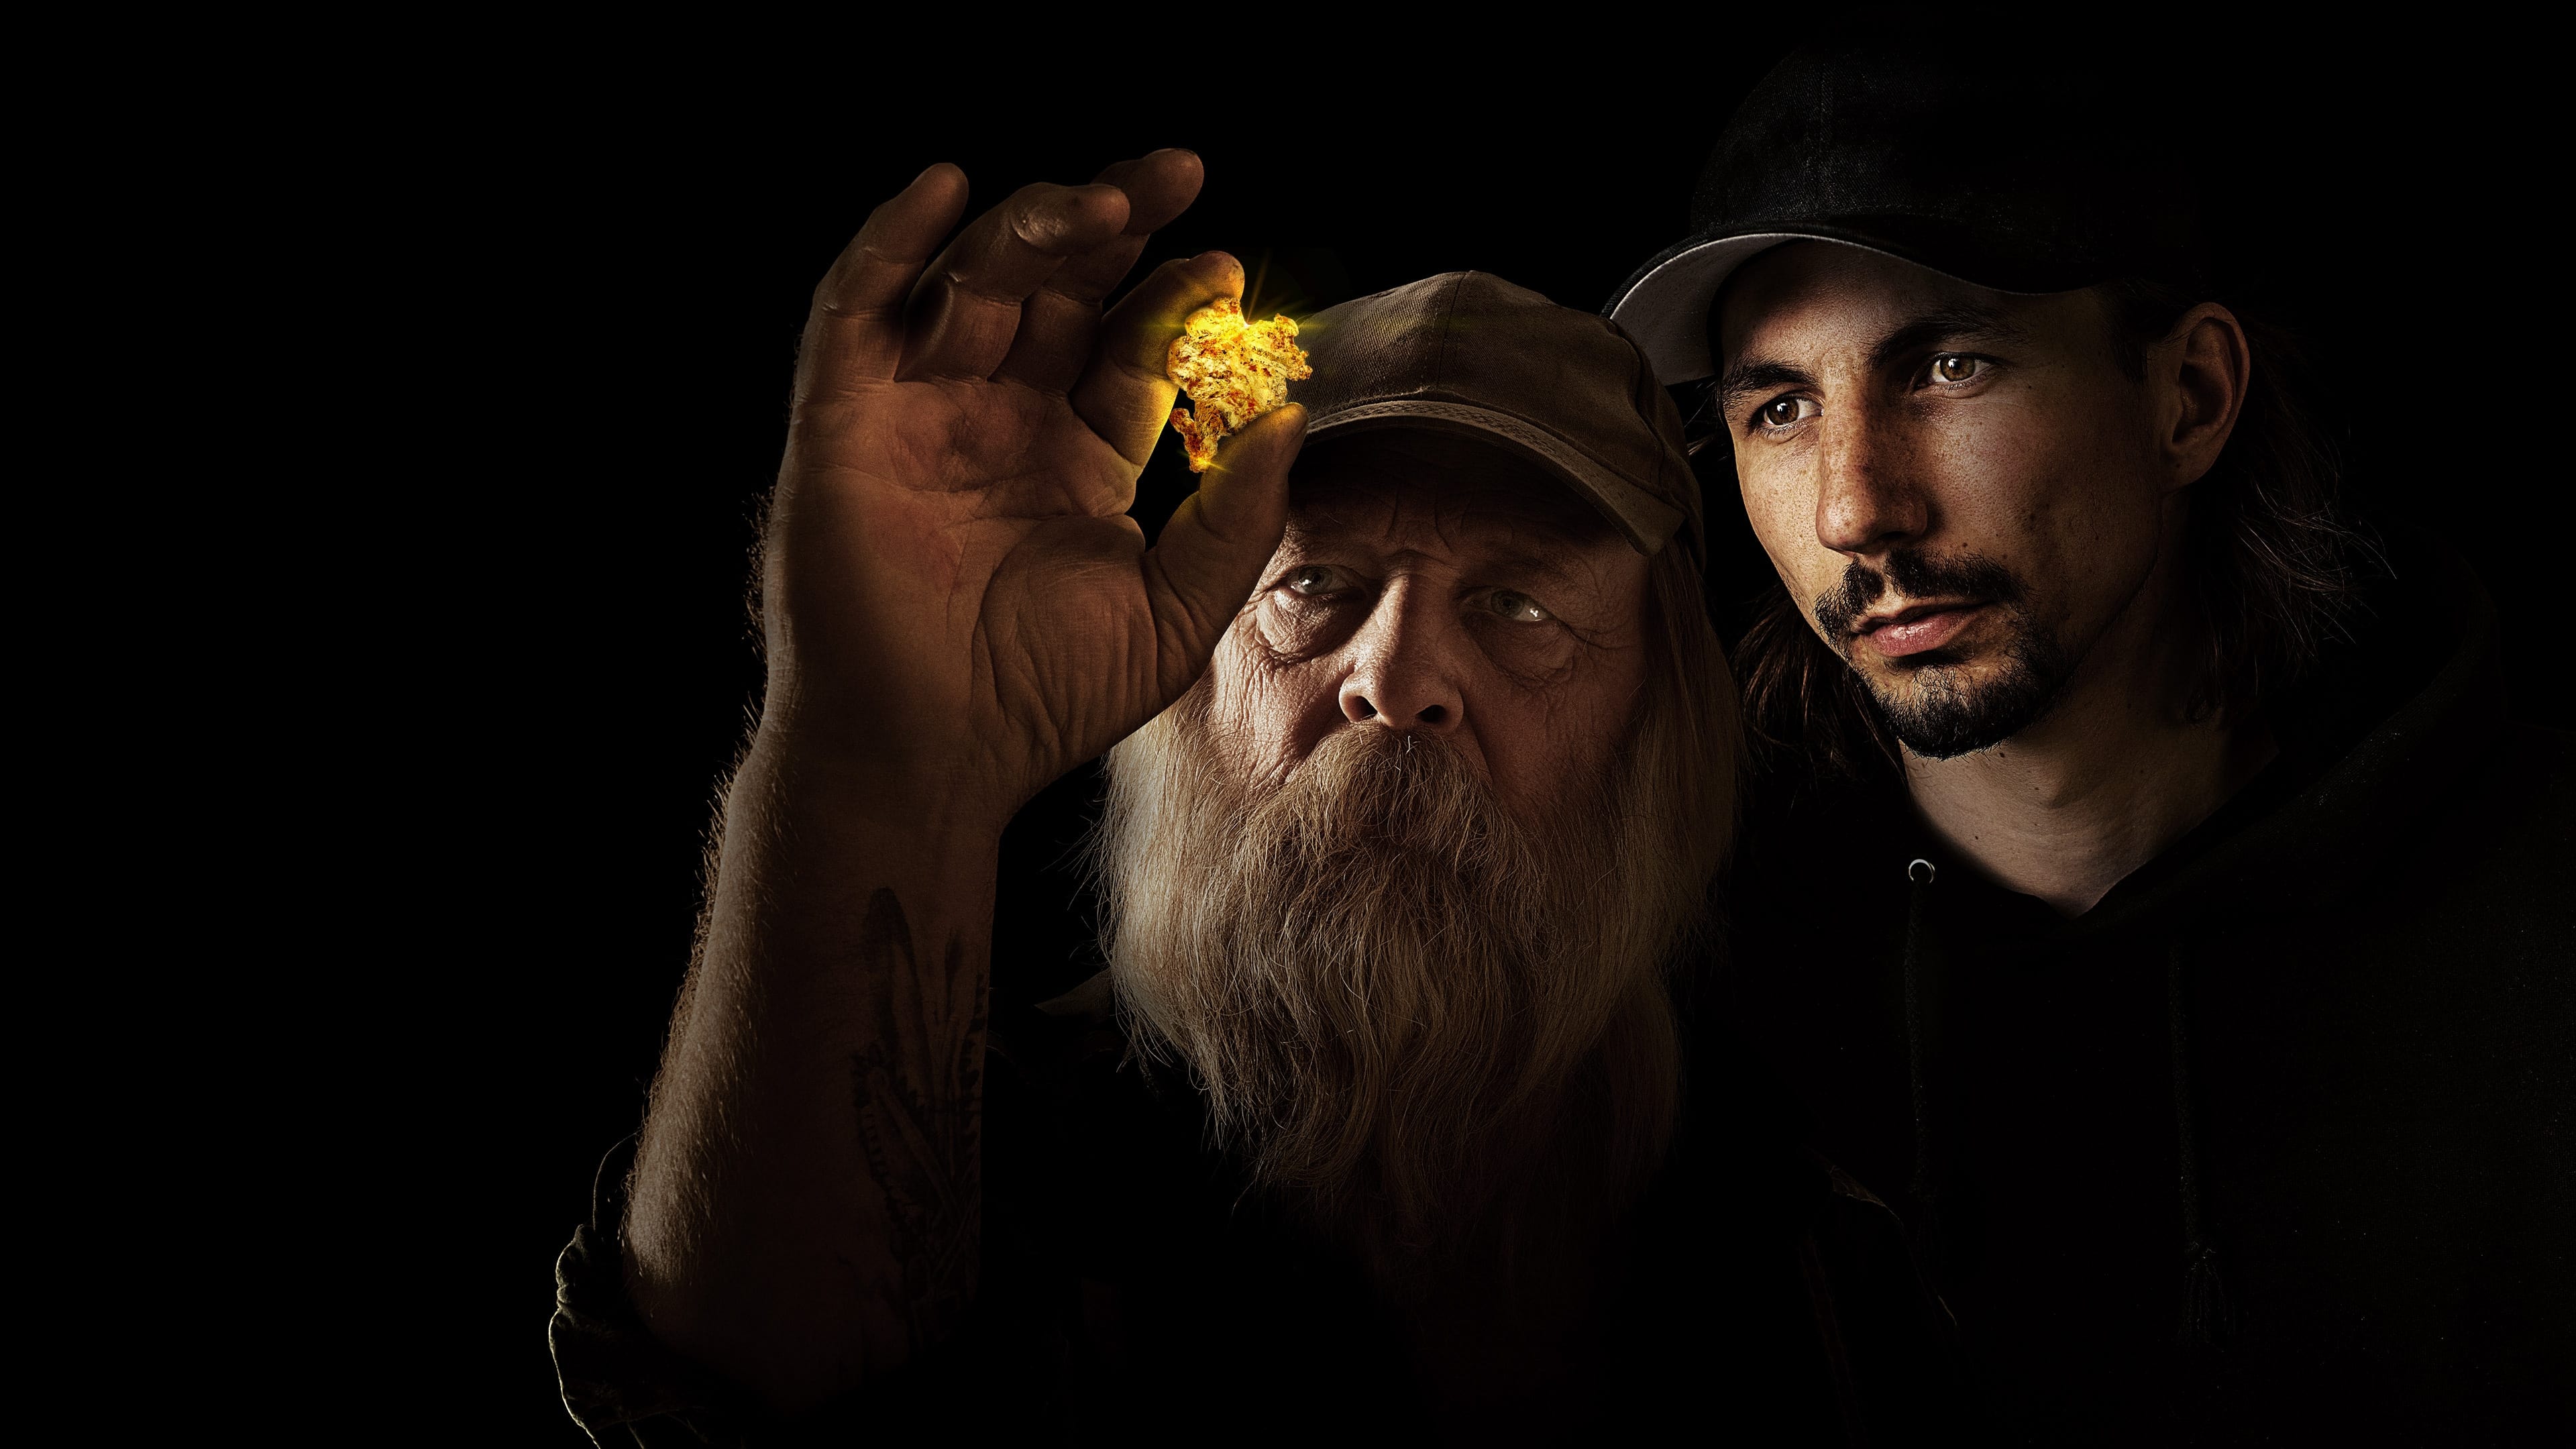 "Gold Rush" promo for Discovery Channel.